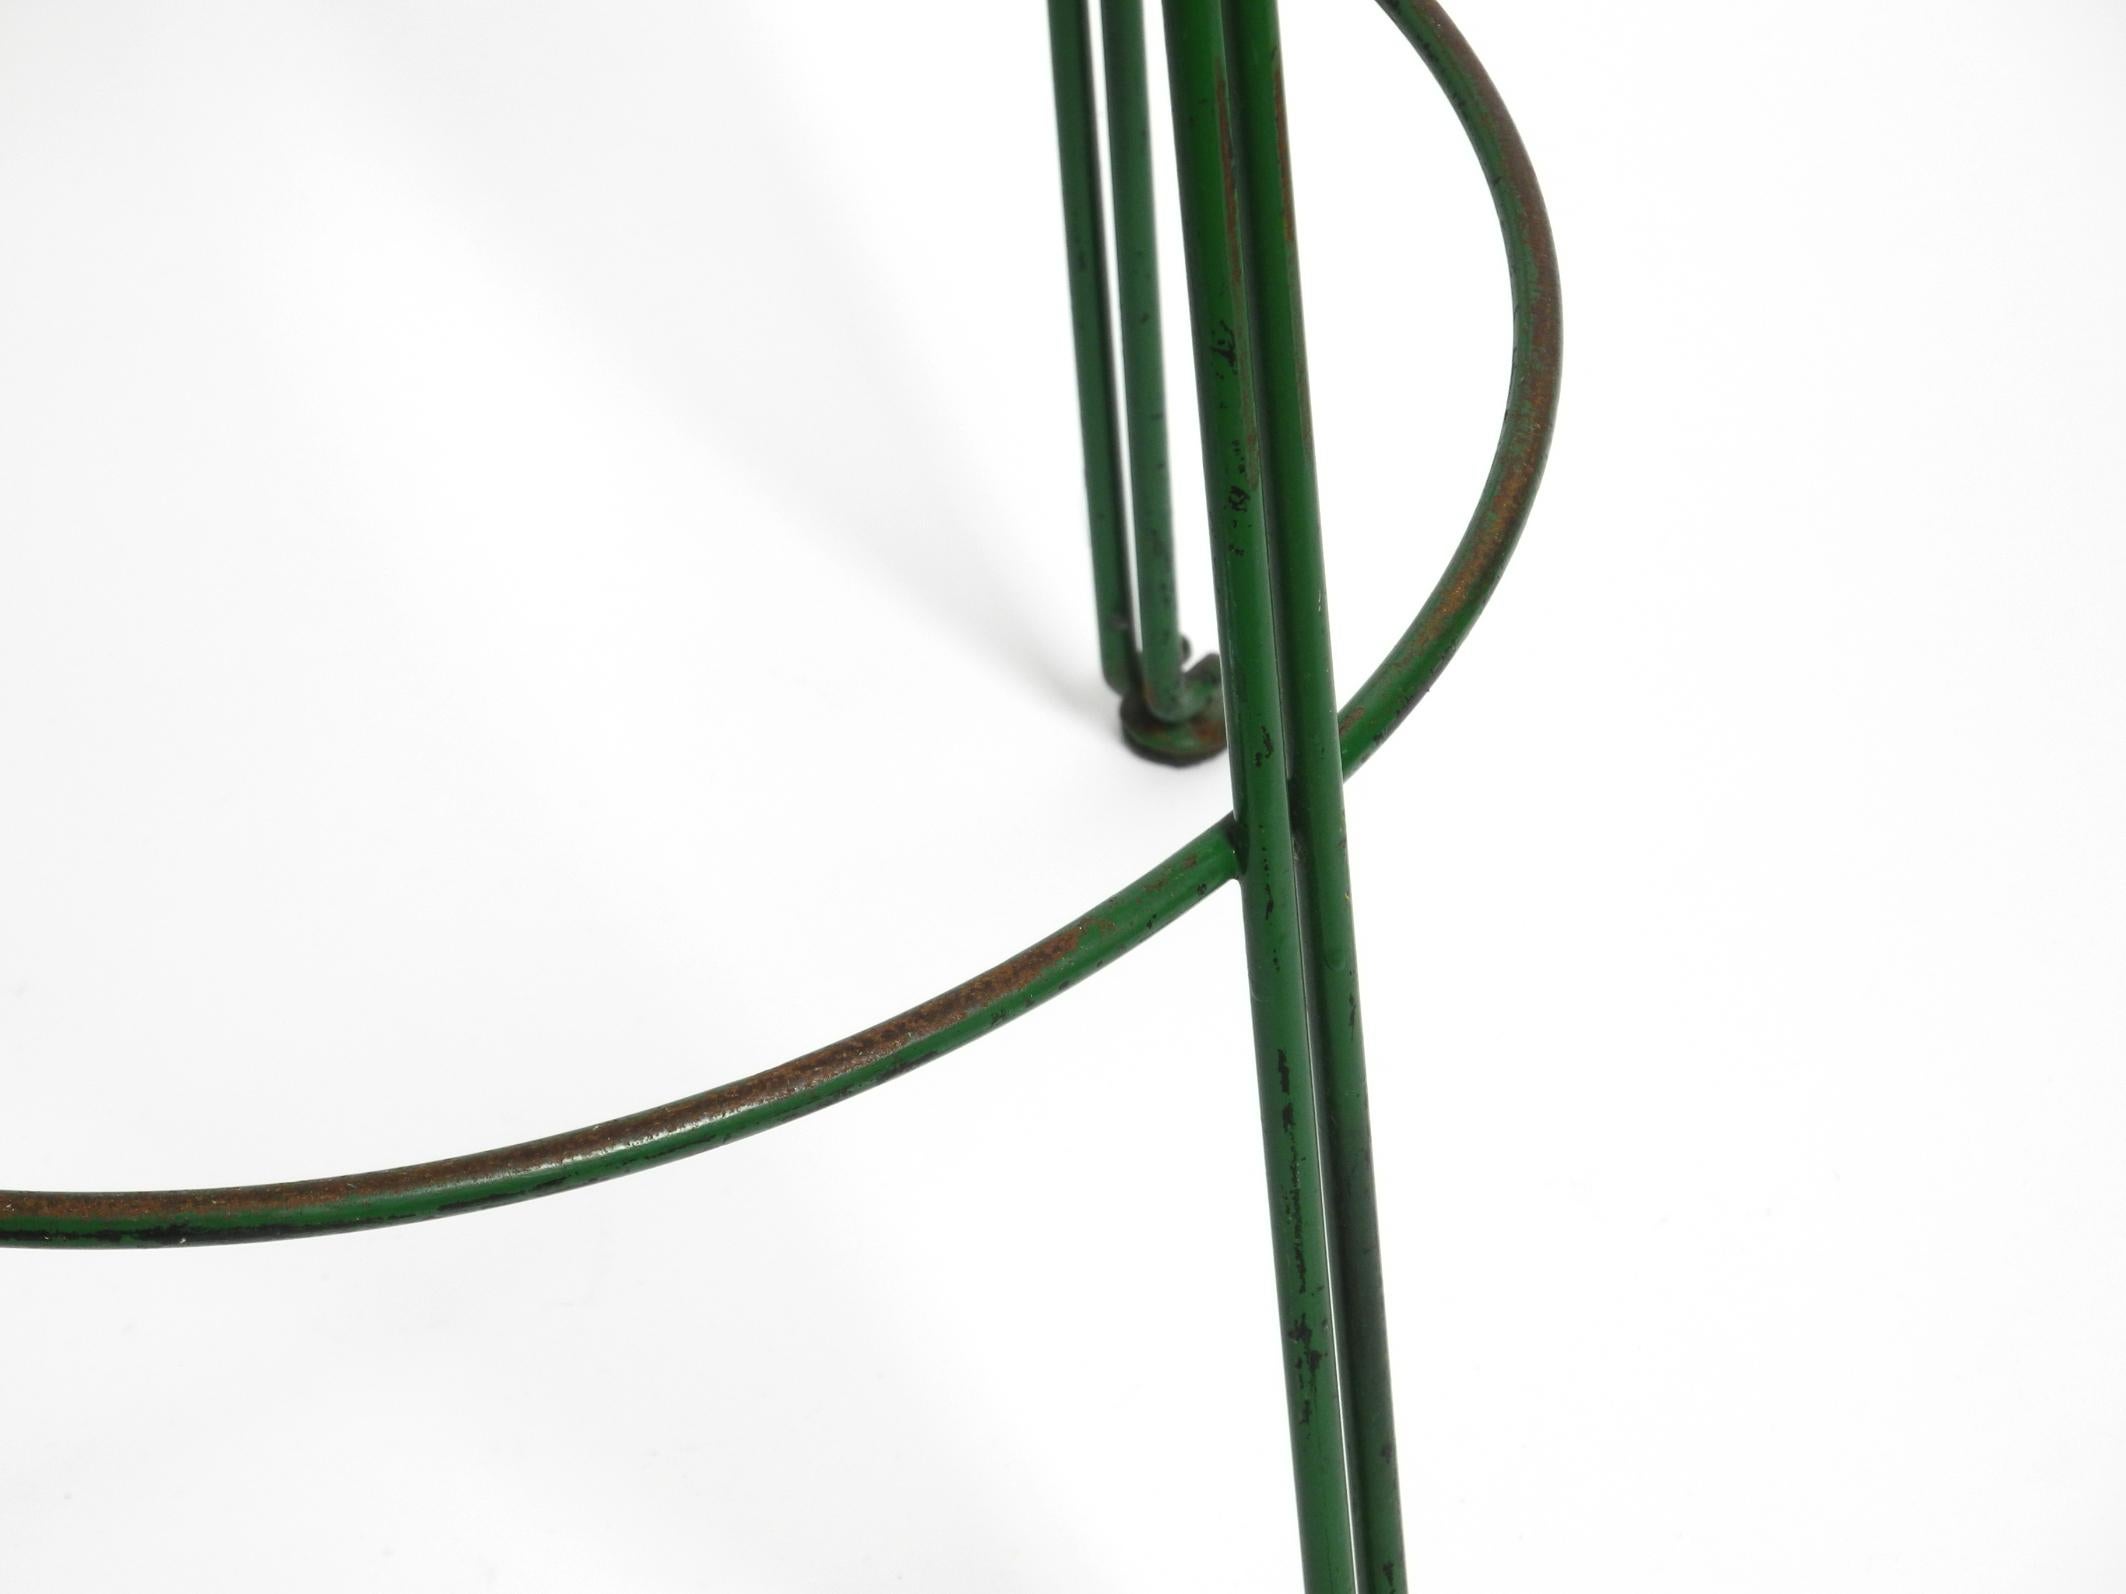 Italian 1960s bar stool made of green painted metal with perforated metal seat For Sale 11